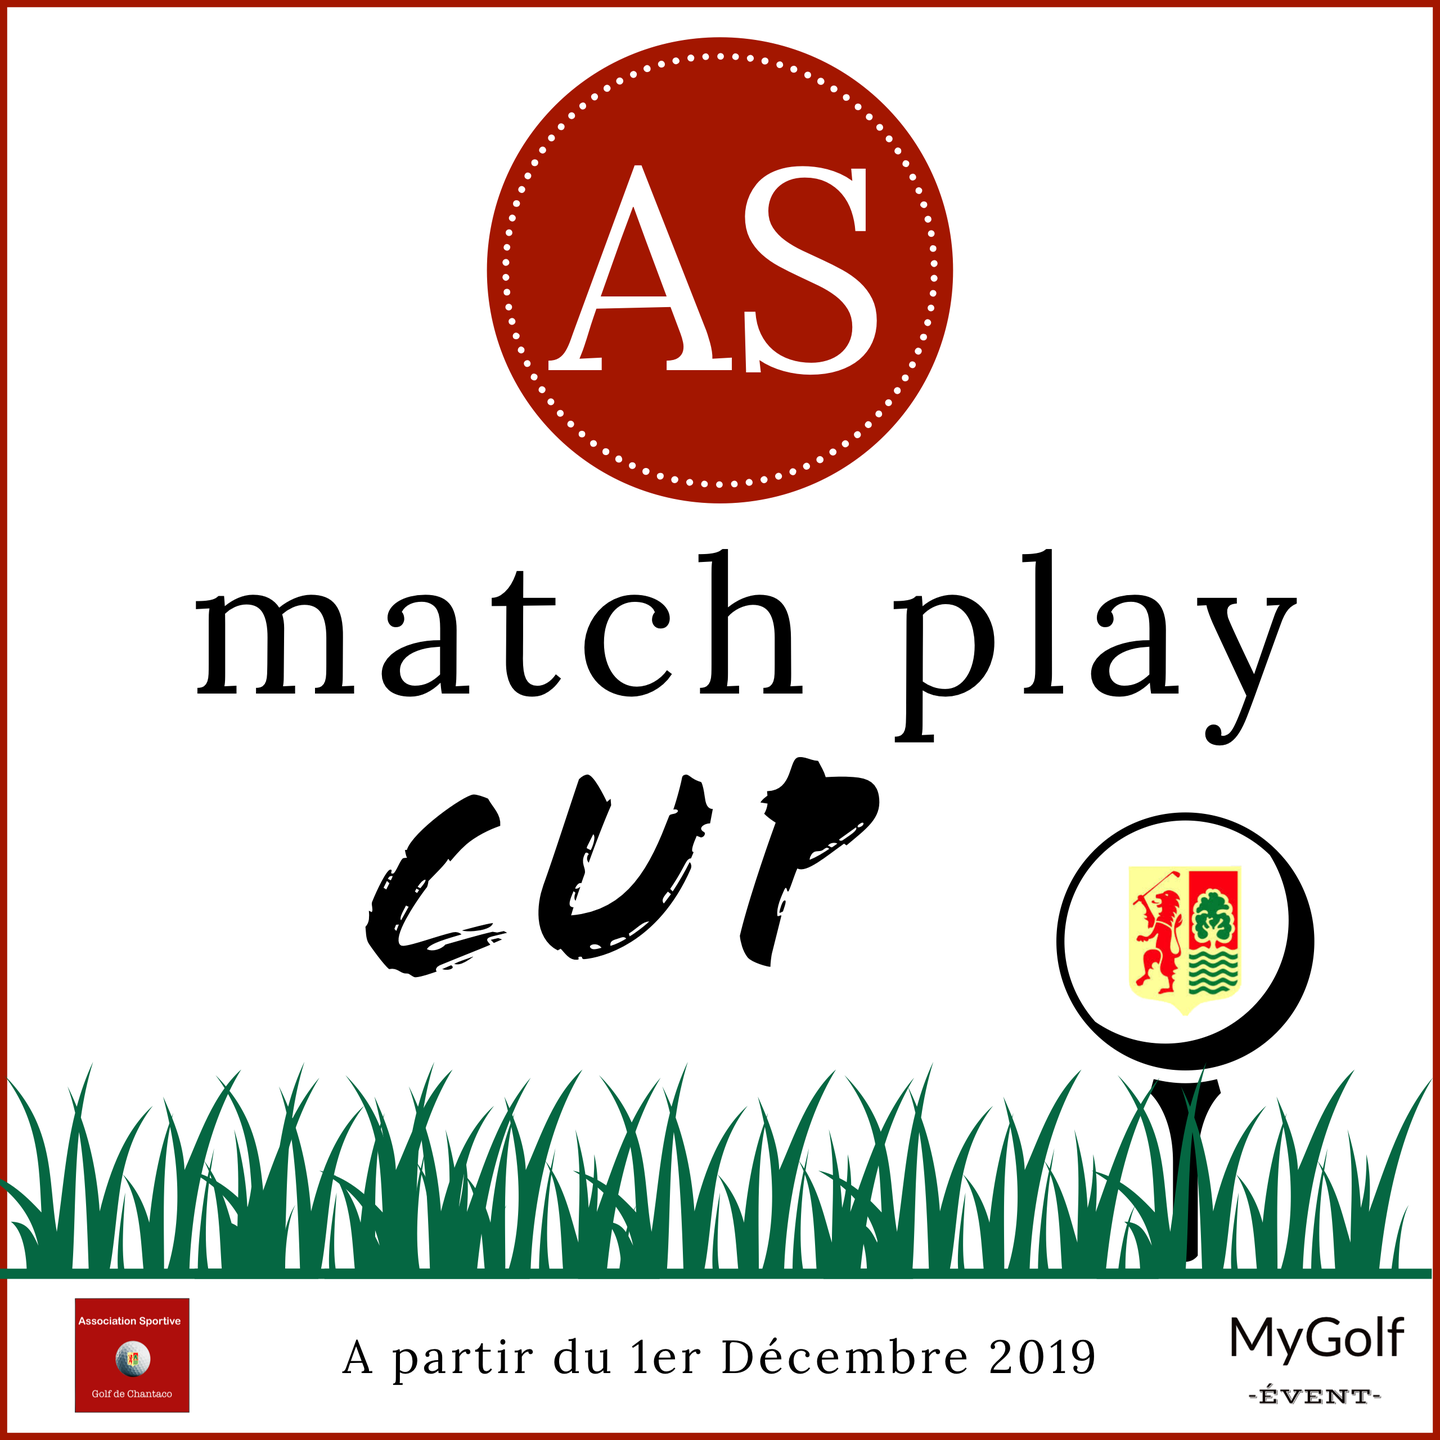 matchplay cup as